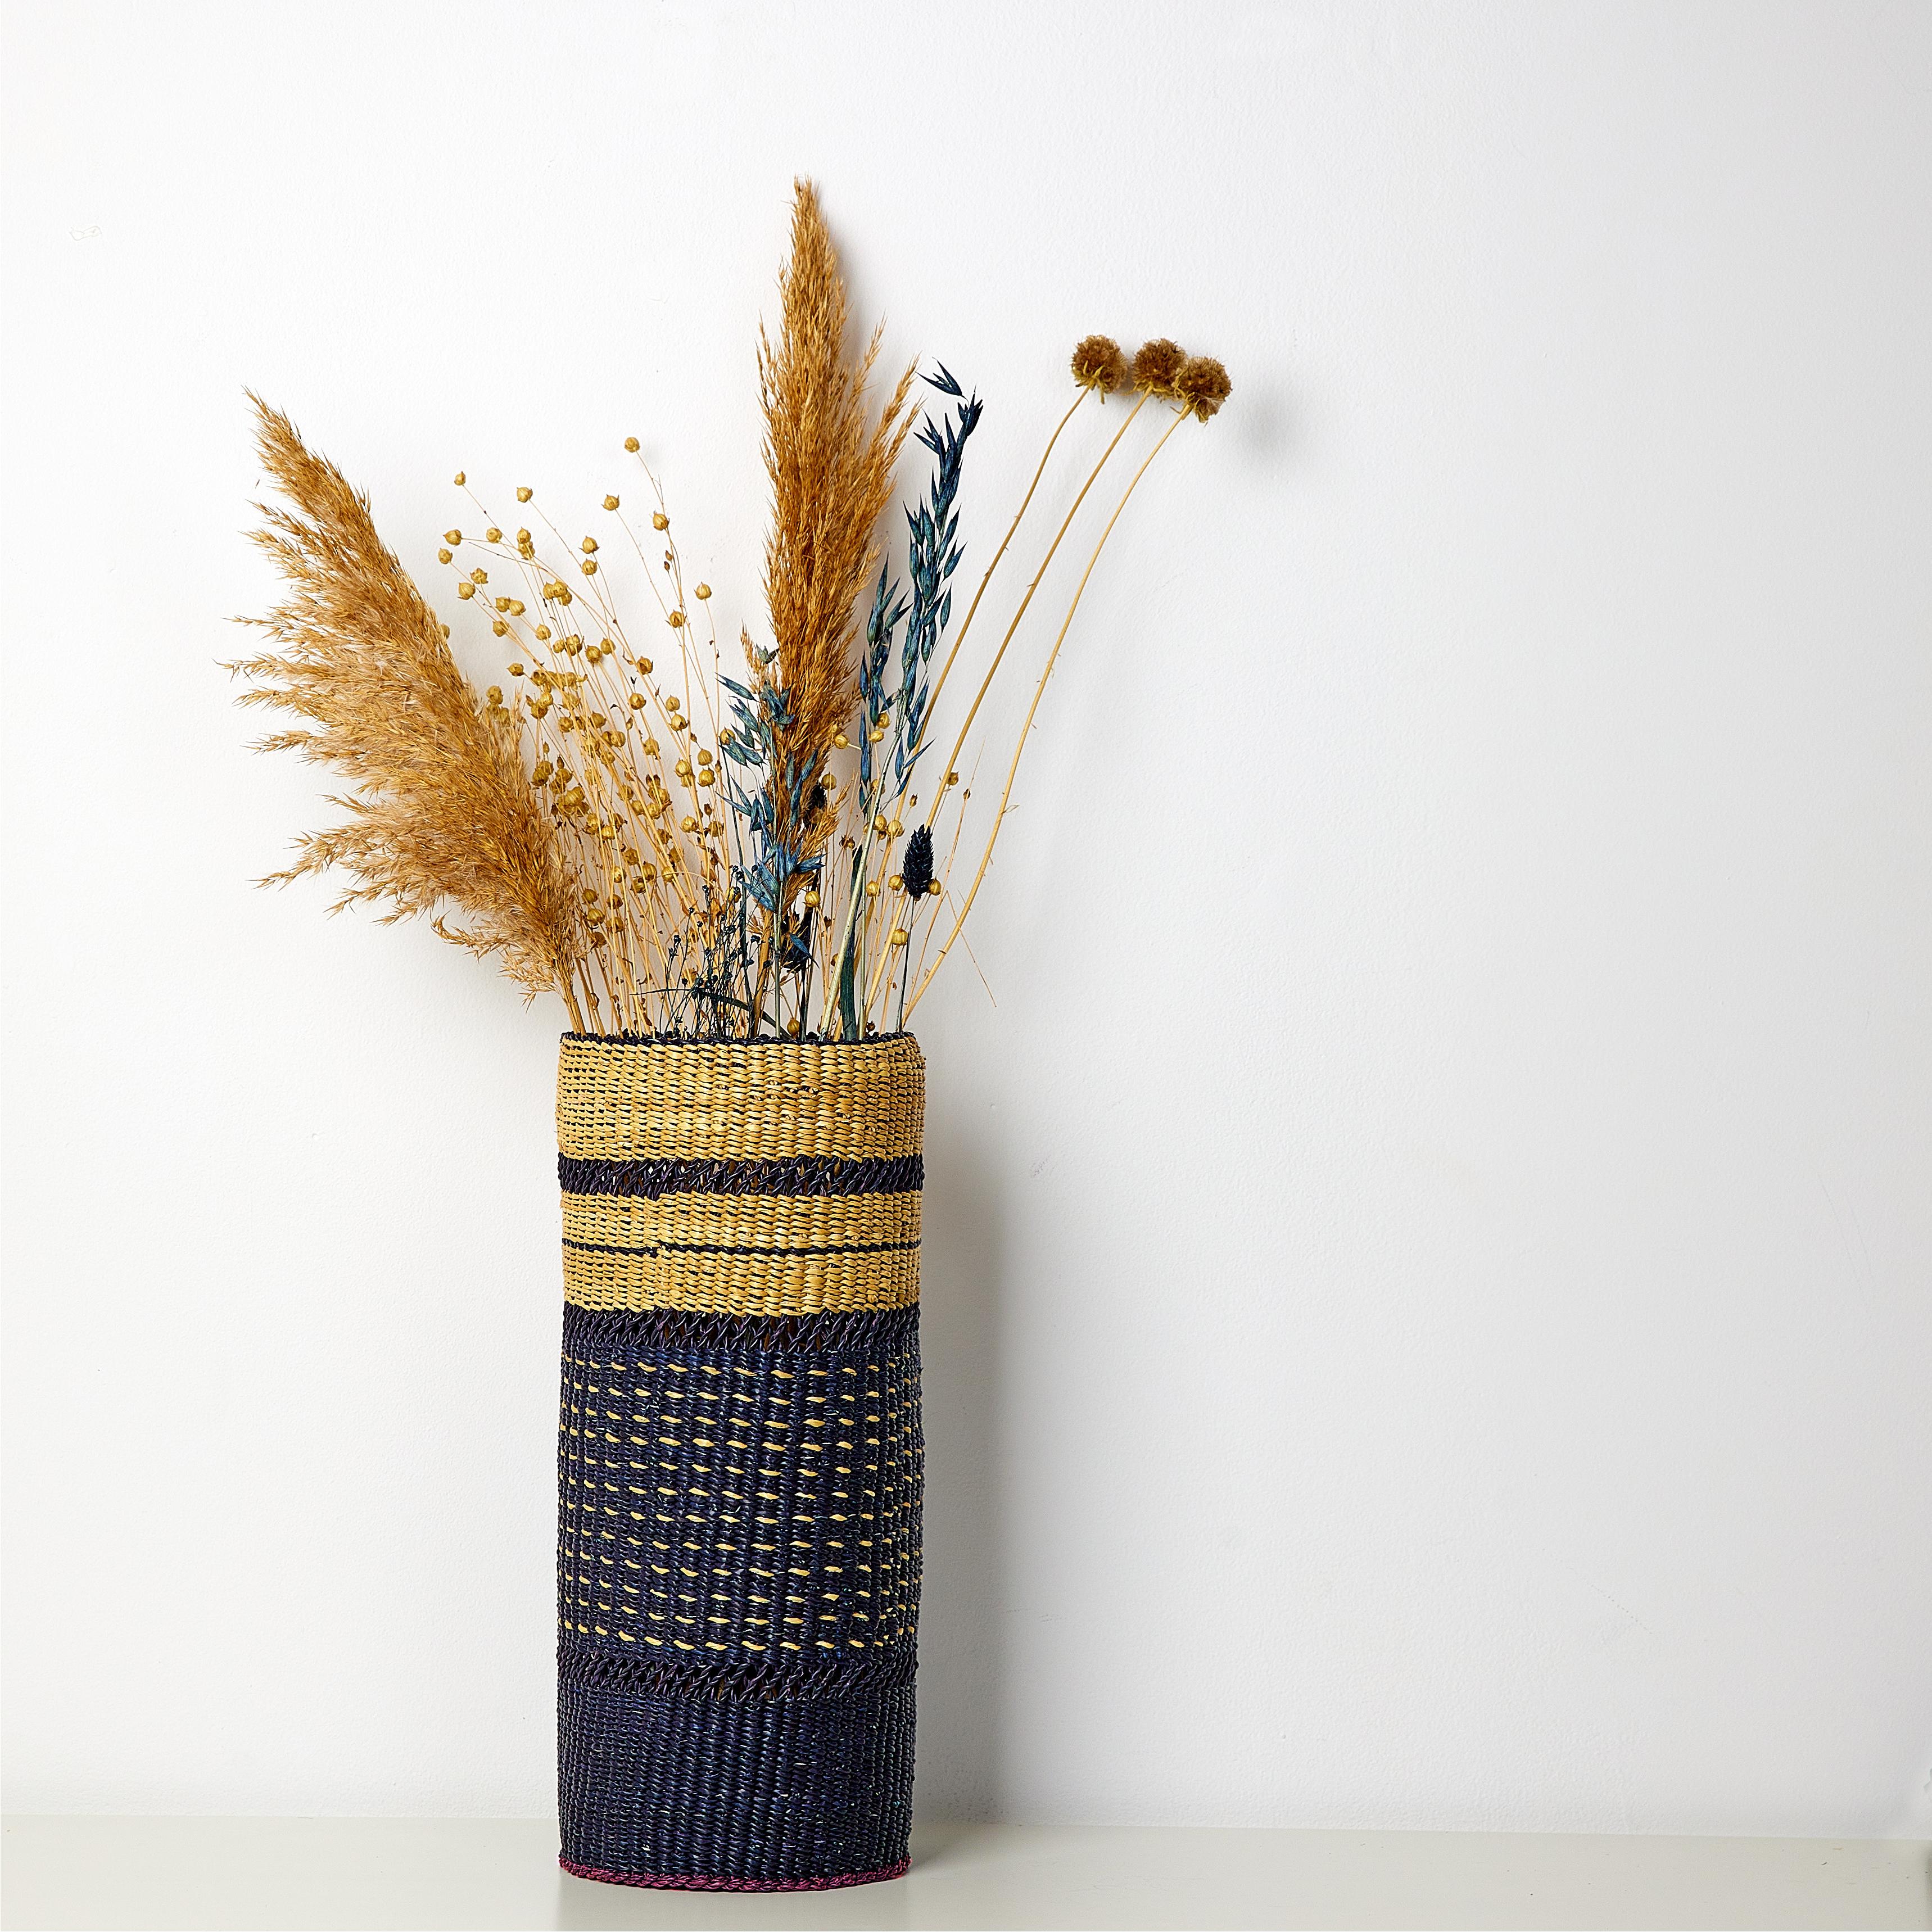 Hand woven blue black vase:

Mysterious elegance

Colour: Blue Black

Characteristics

33x18cm hand woven straw table mat;
Available in 2 colours : Burgundy Red, Blue Black

Are you looking for a unique vase for dry flowers?
This natural vase is